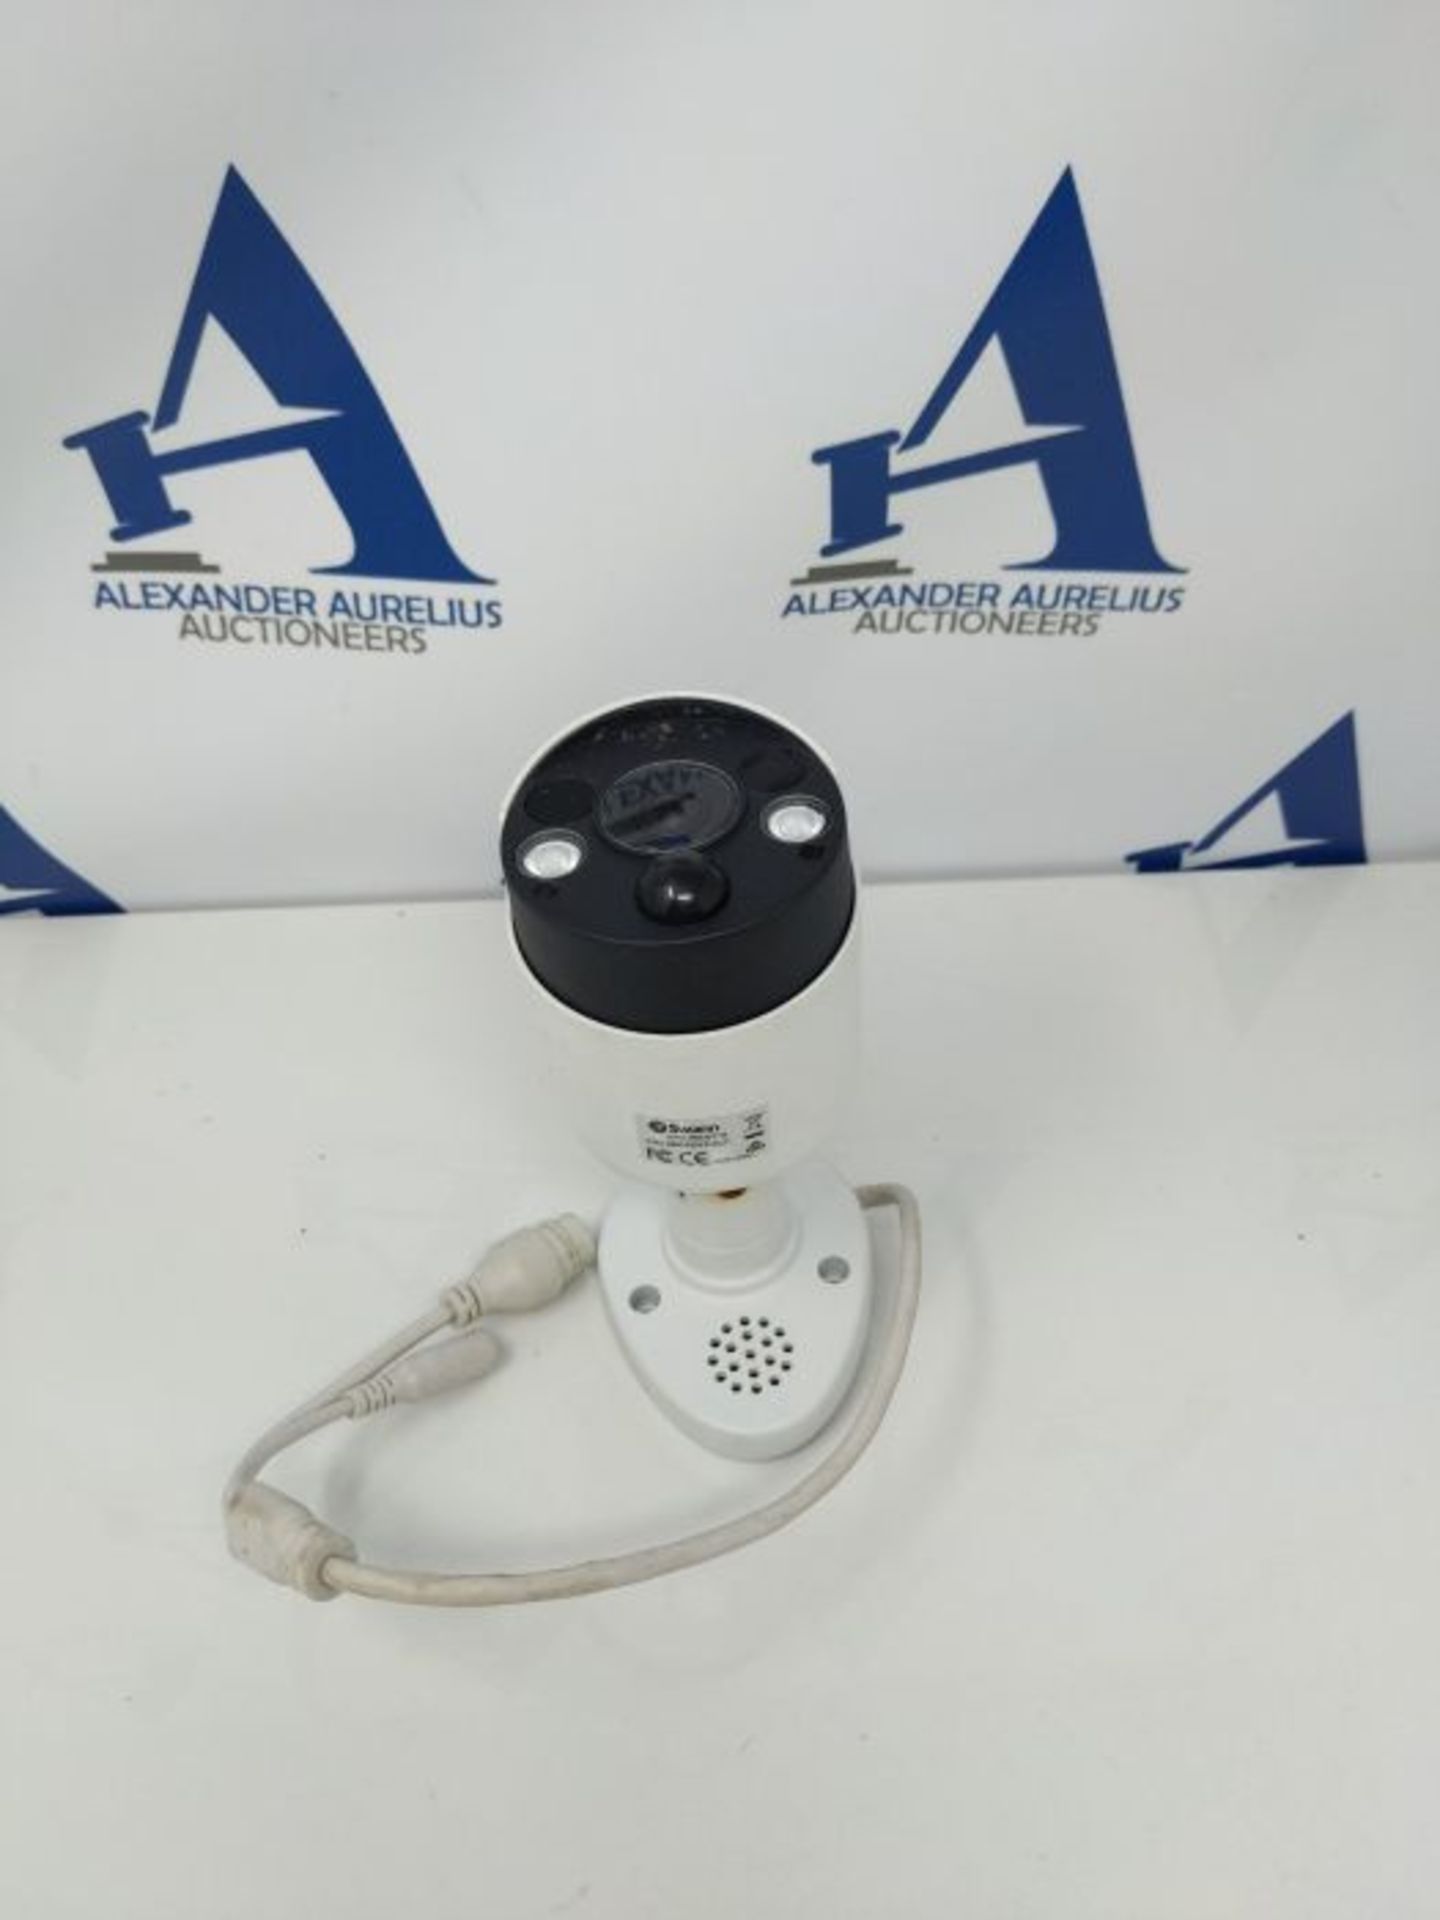 RRP £109.00 Swann Security CCTV 4K Thermal Sensing Bullet IP Security Camera with Face Recognition - Image 3 of 3